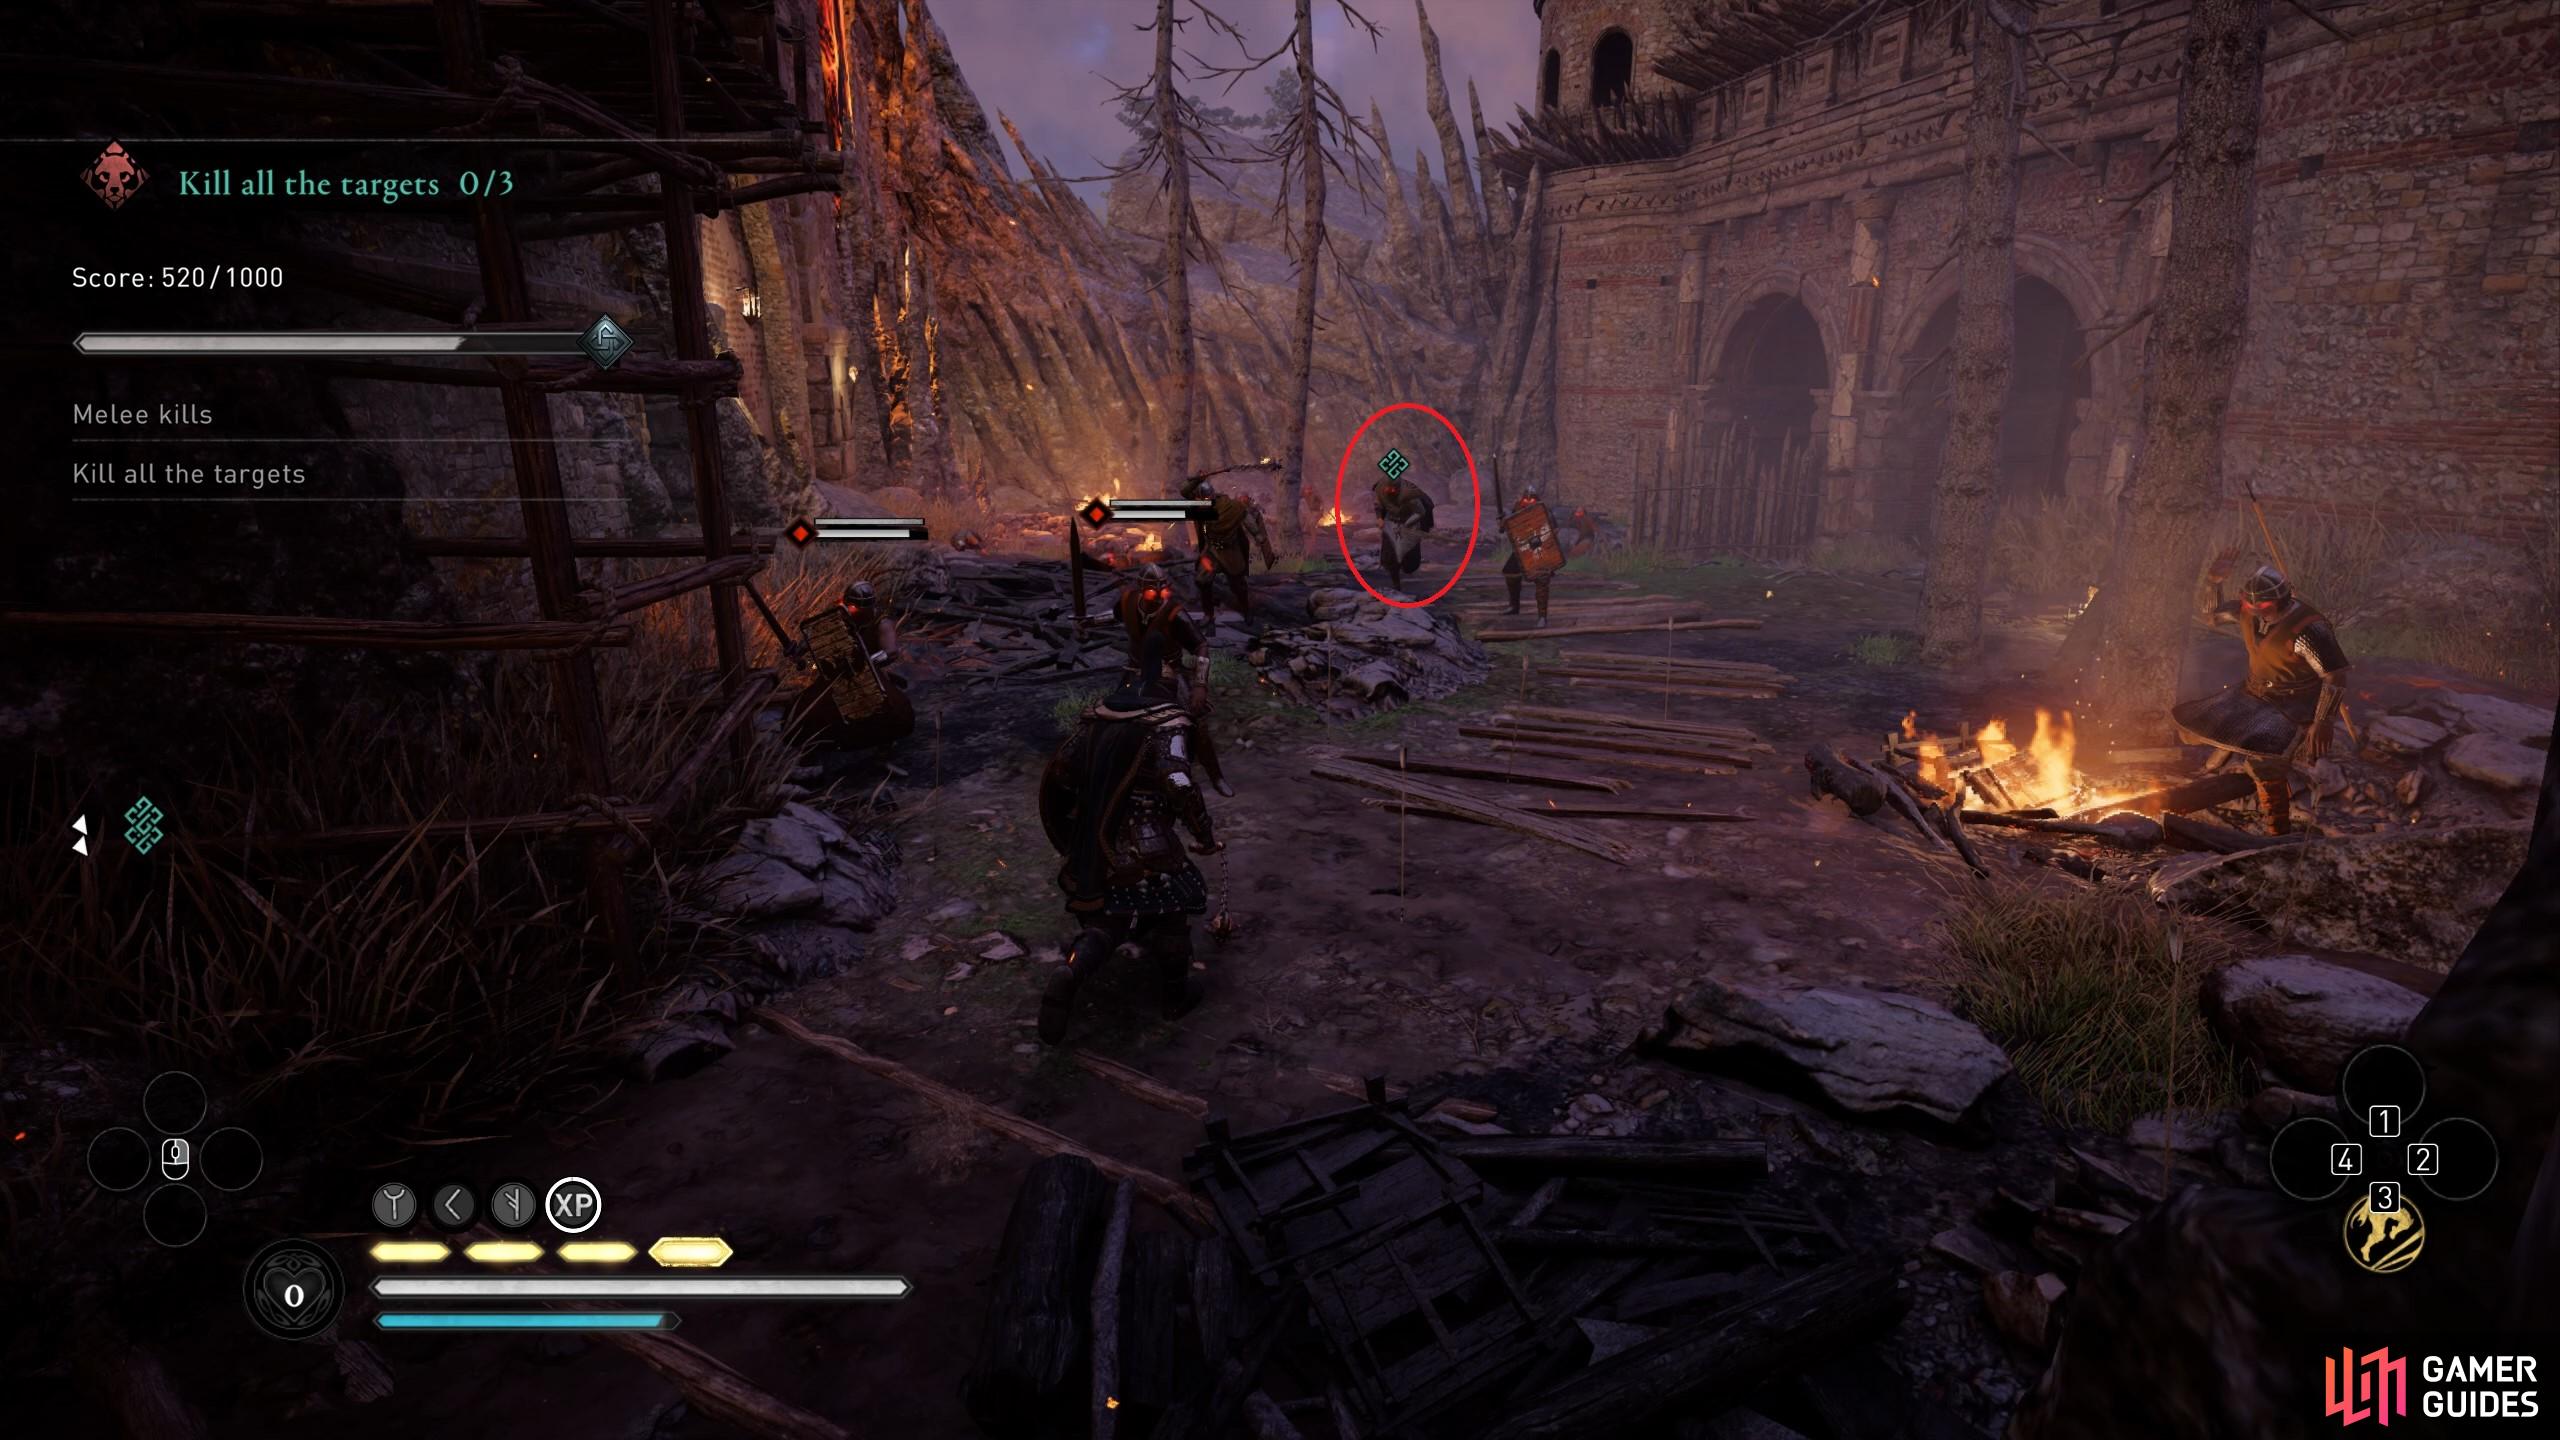 Don't kill all the marked targets until you've completed both objectives of parrying and melee kills.